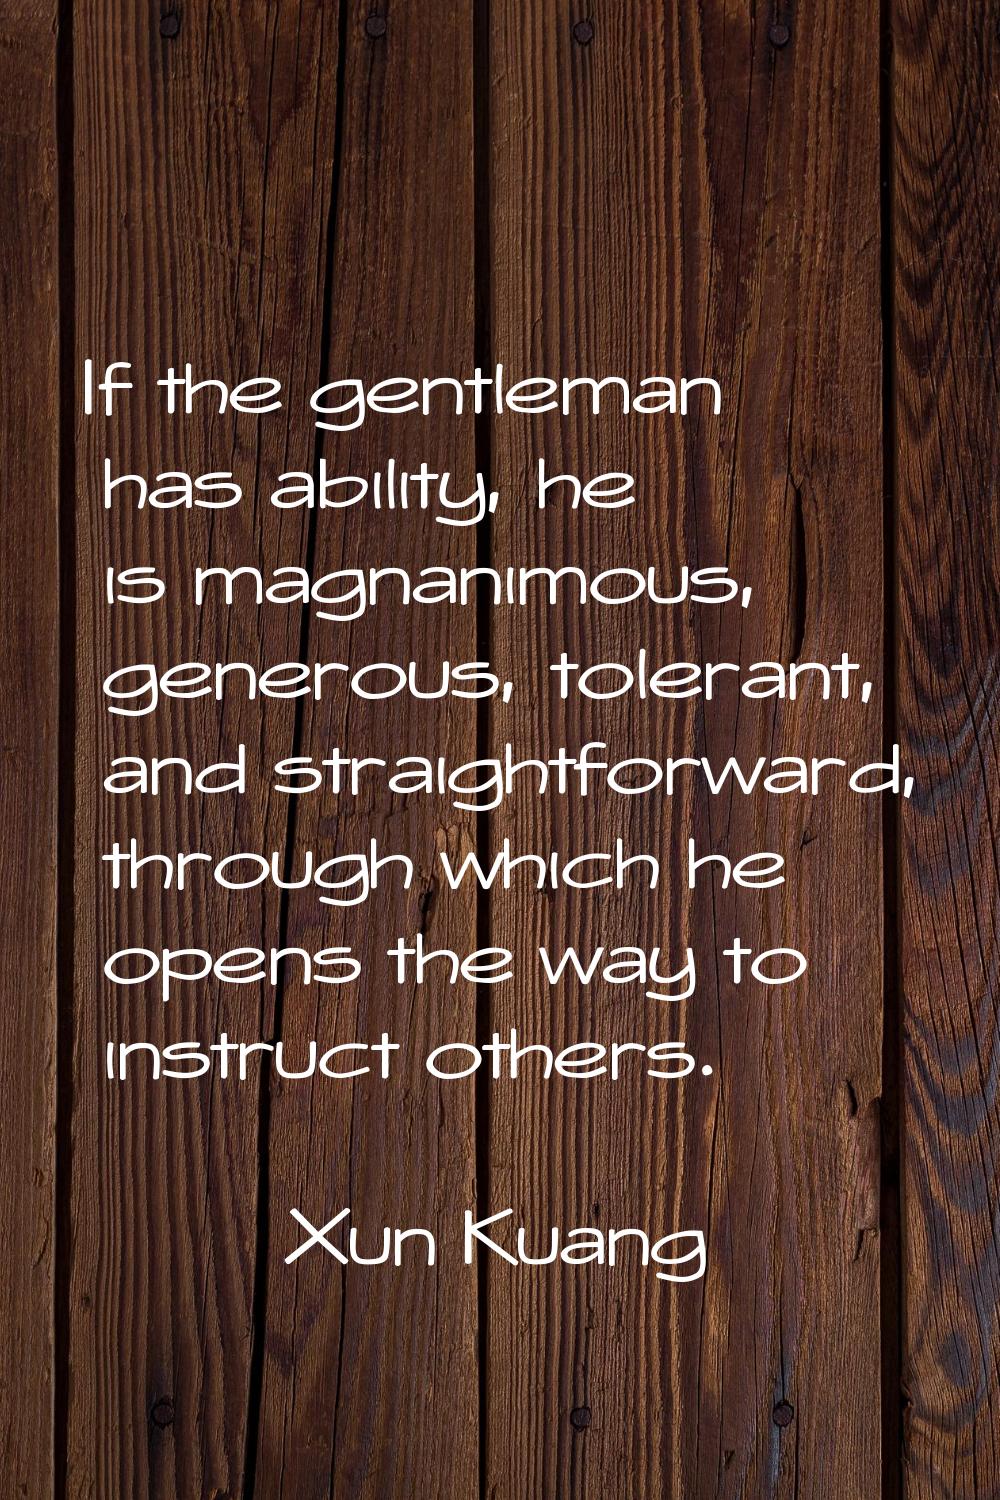 If the gentleman has ability, he is magnanimous, generous, tolerant, and straightforward, through w